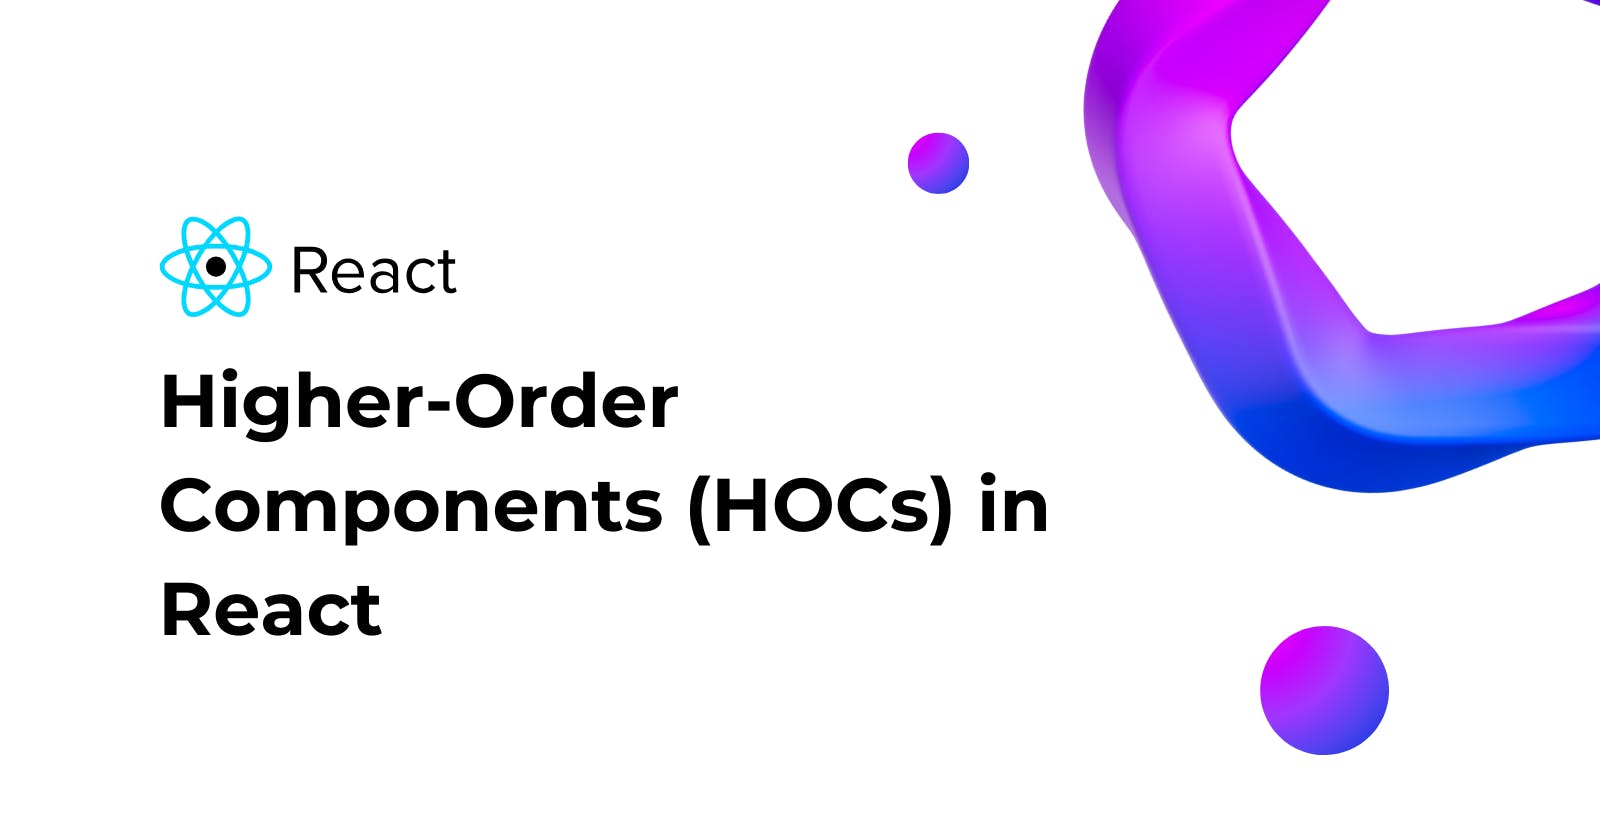 Higher-Order Components (HOCs) in React